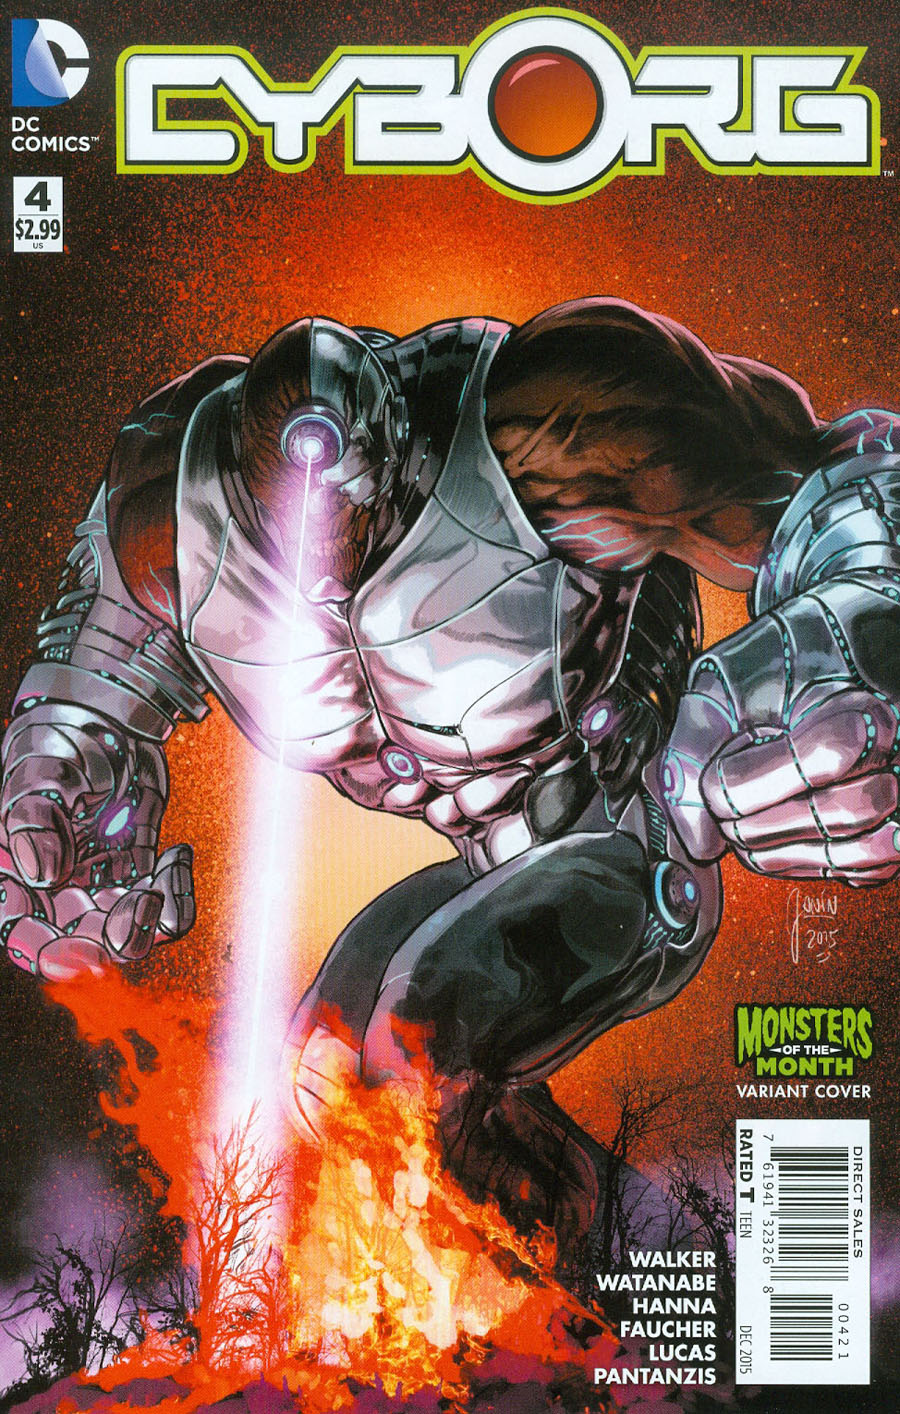 Cyborg #4 Cover B Variant Mikel Janin Monsters Cover